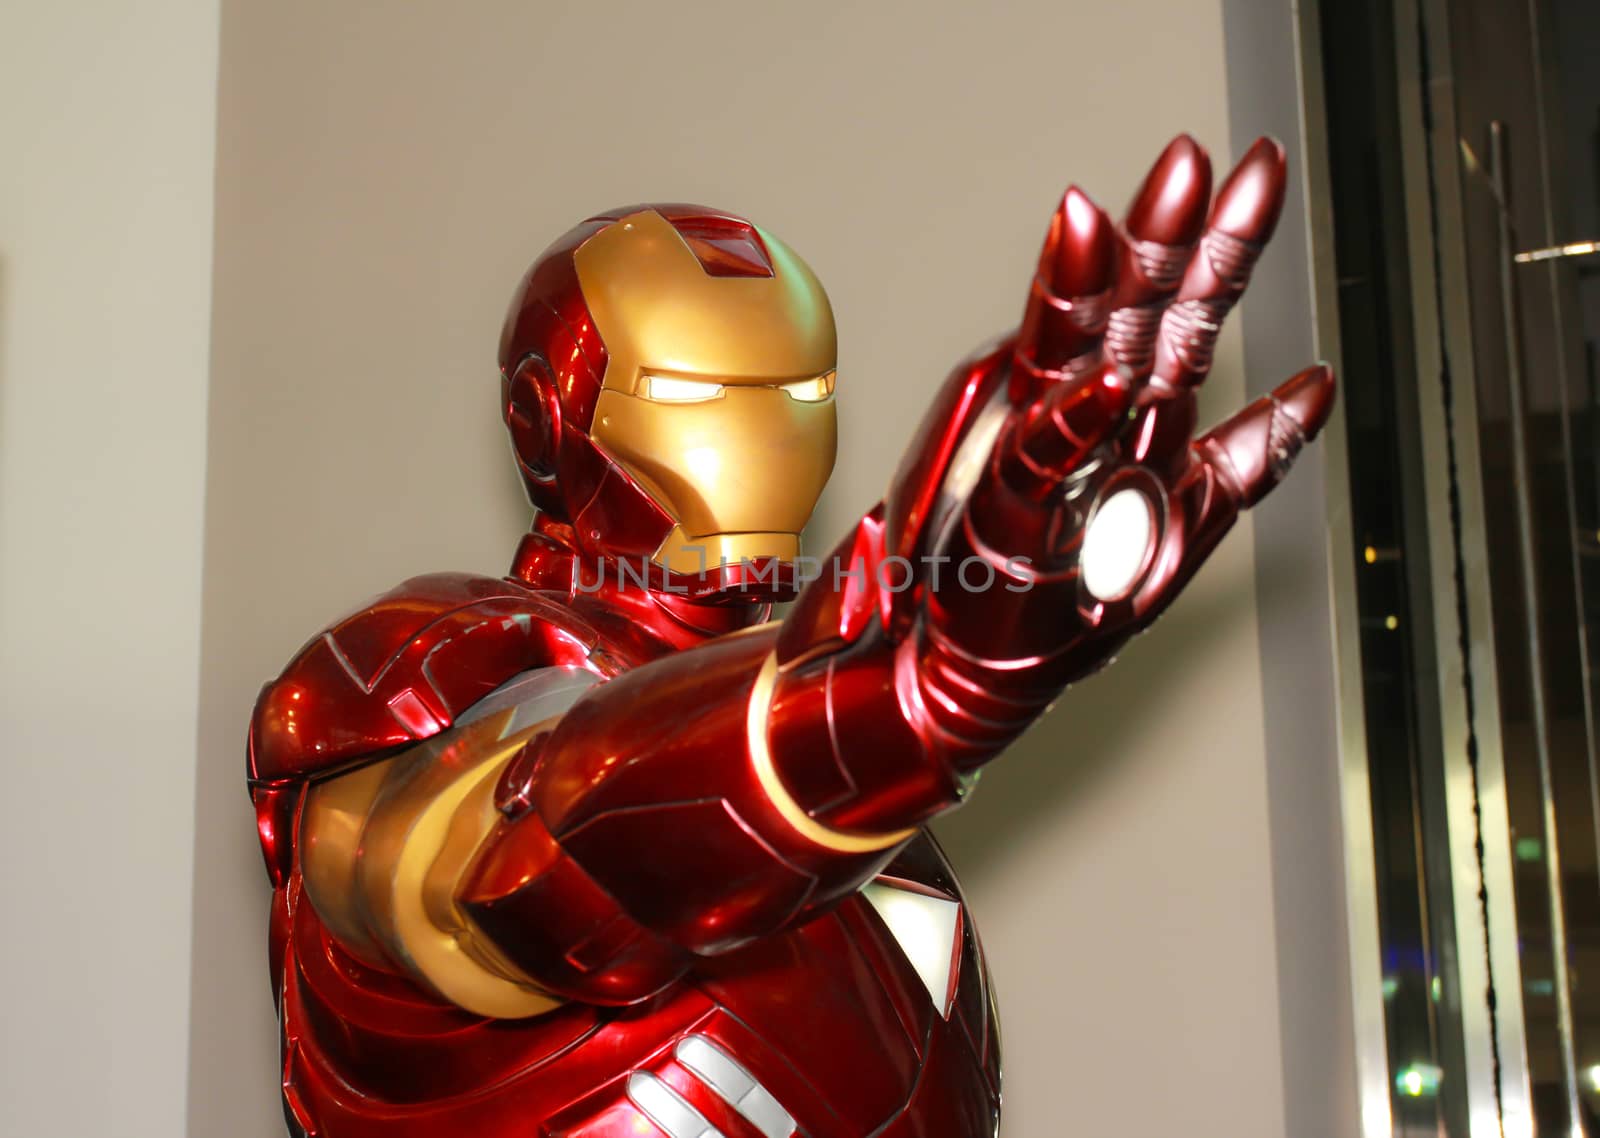 A model of the character Iron Man from the movies and comics 17 by redthirteen